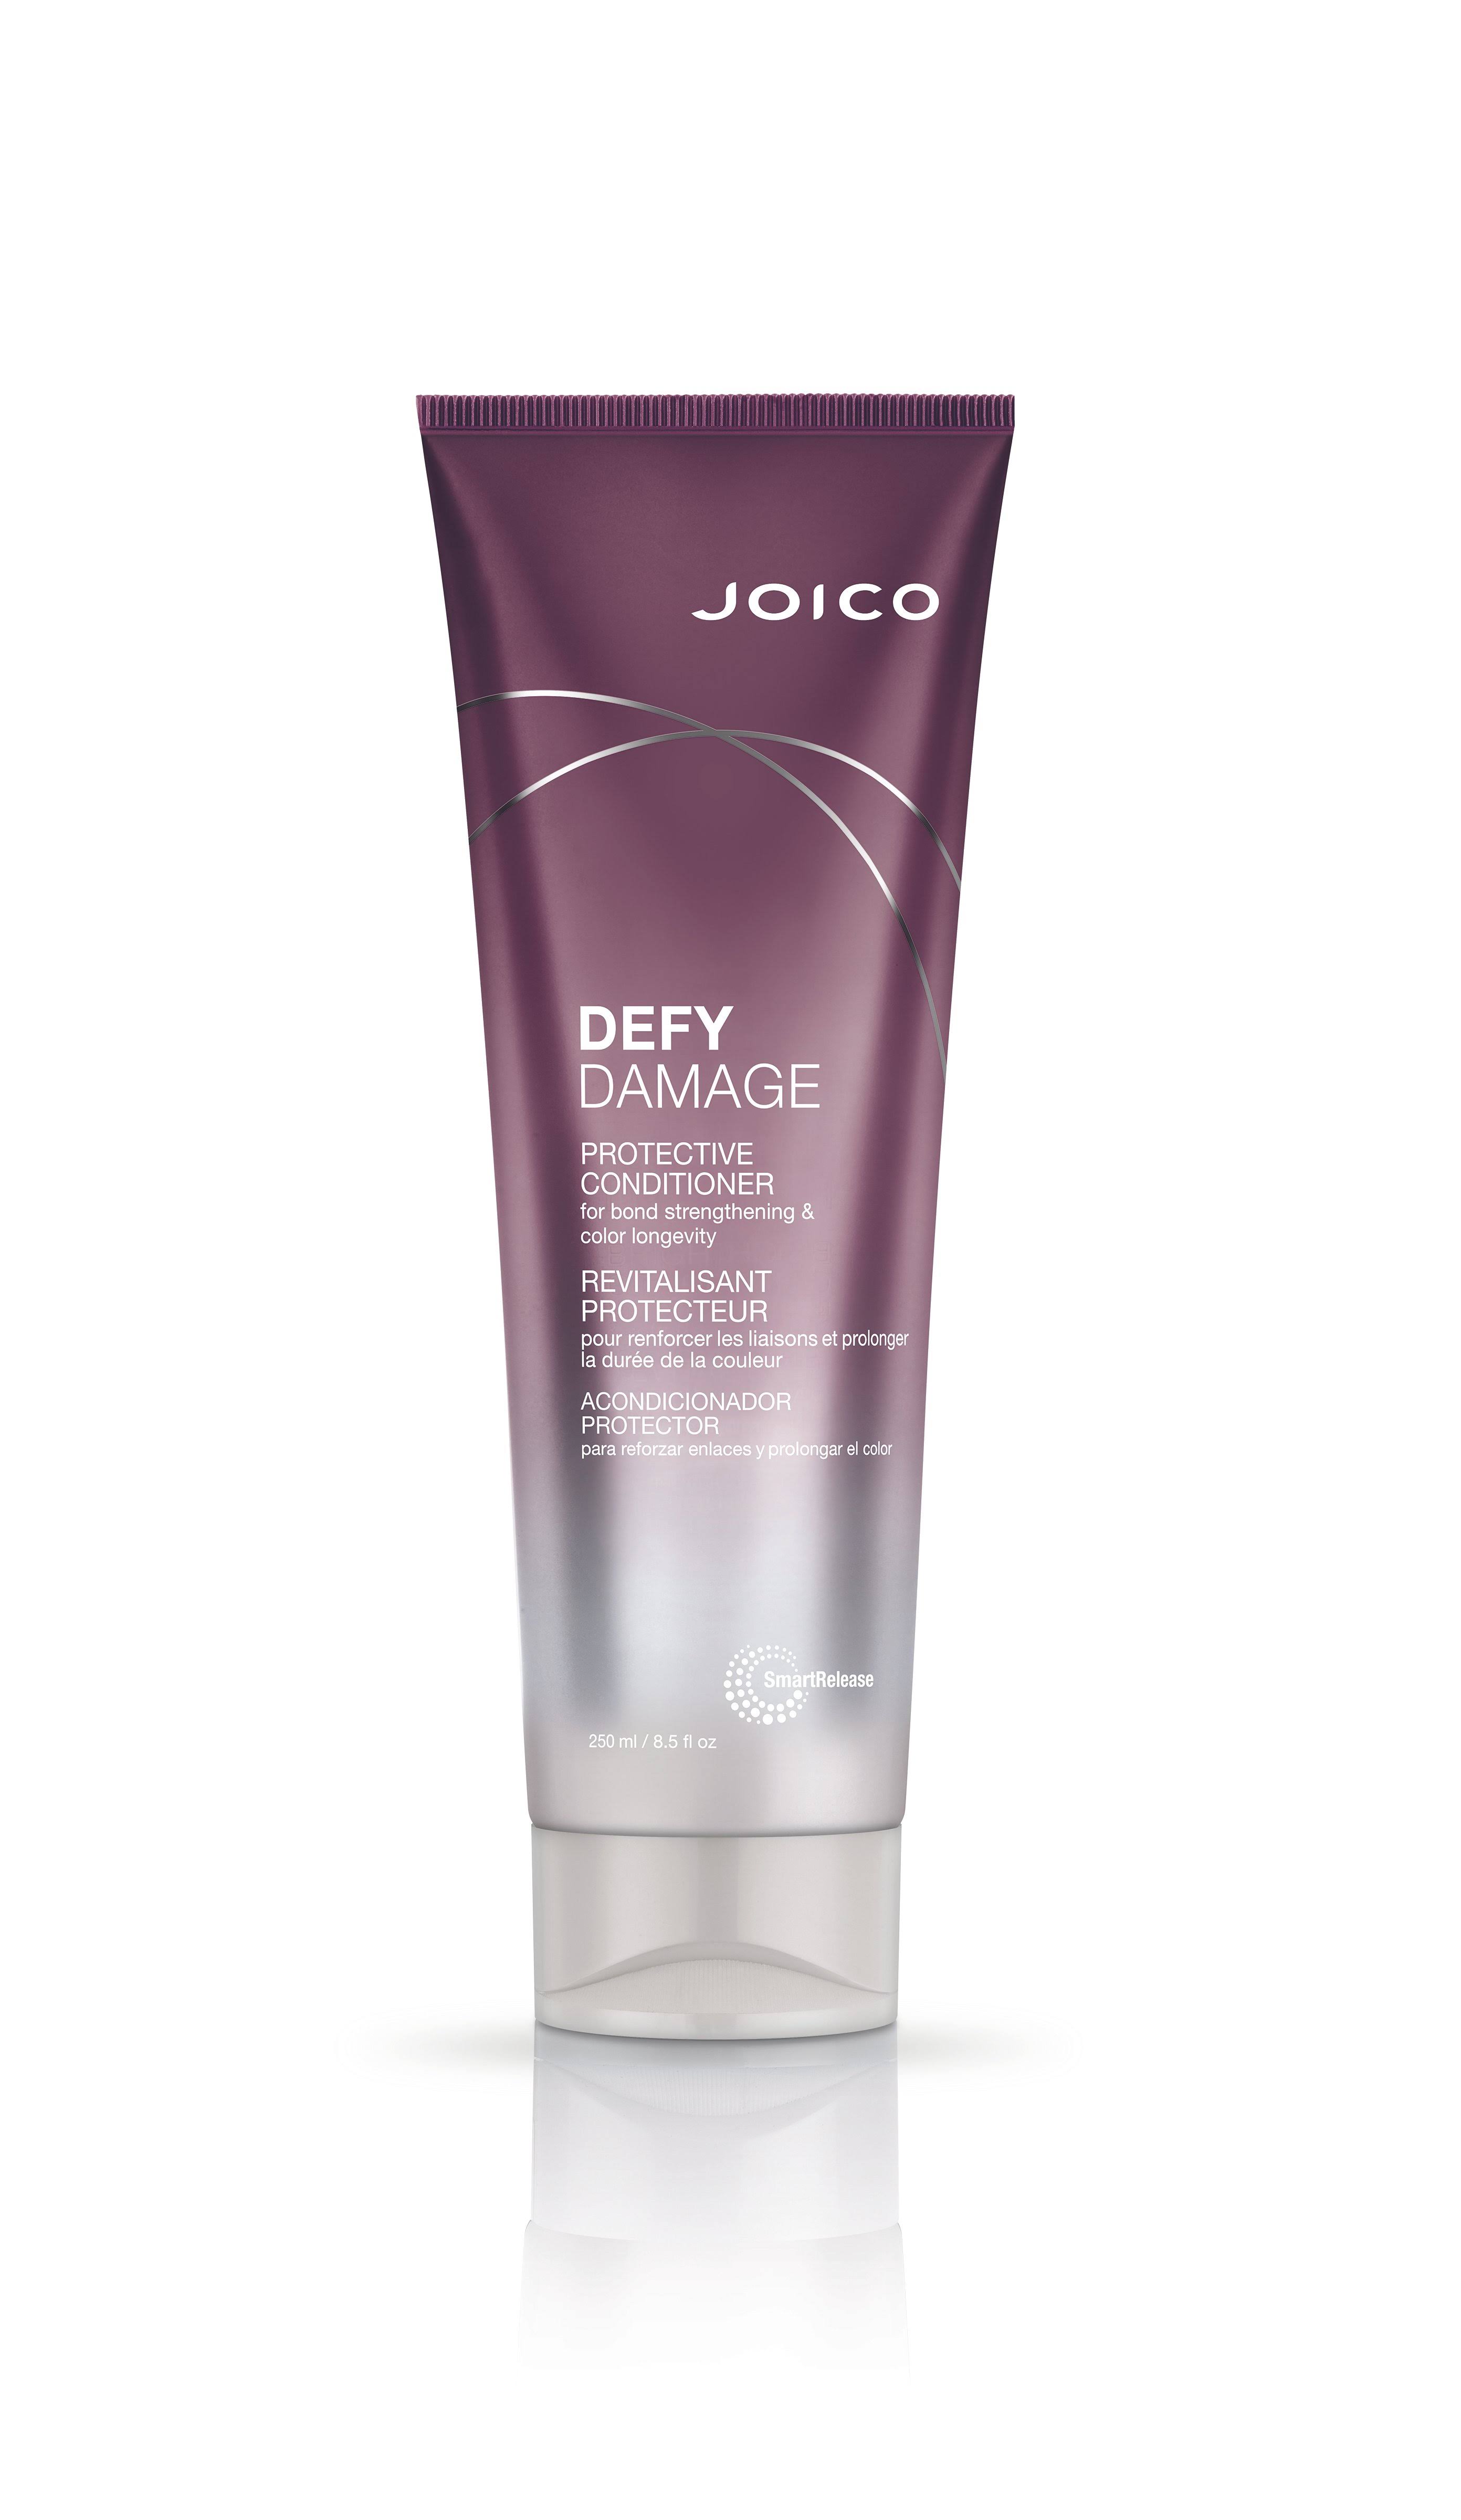 JOICO DEFY DAMAGE Protective Conditioner 250 ml